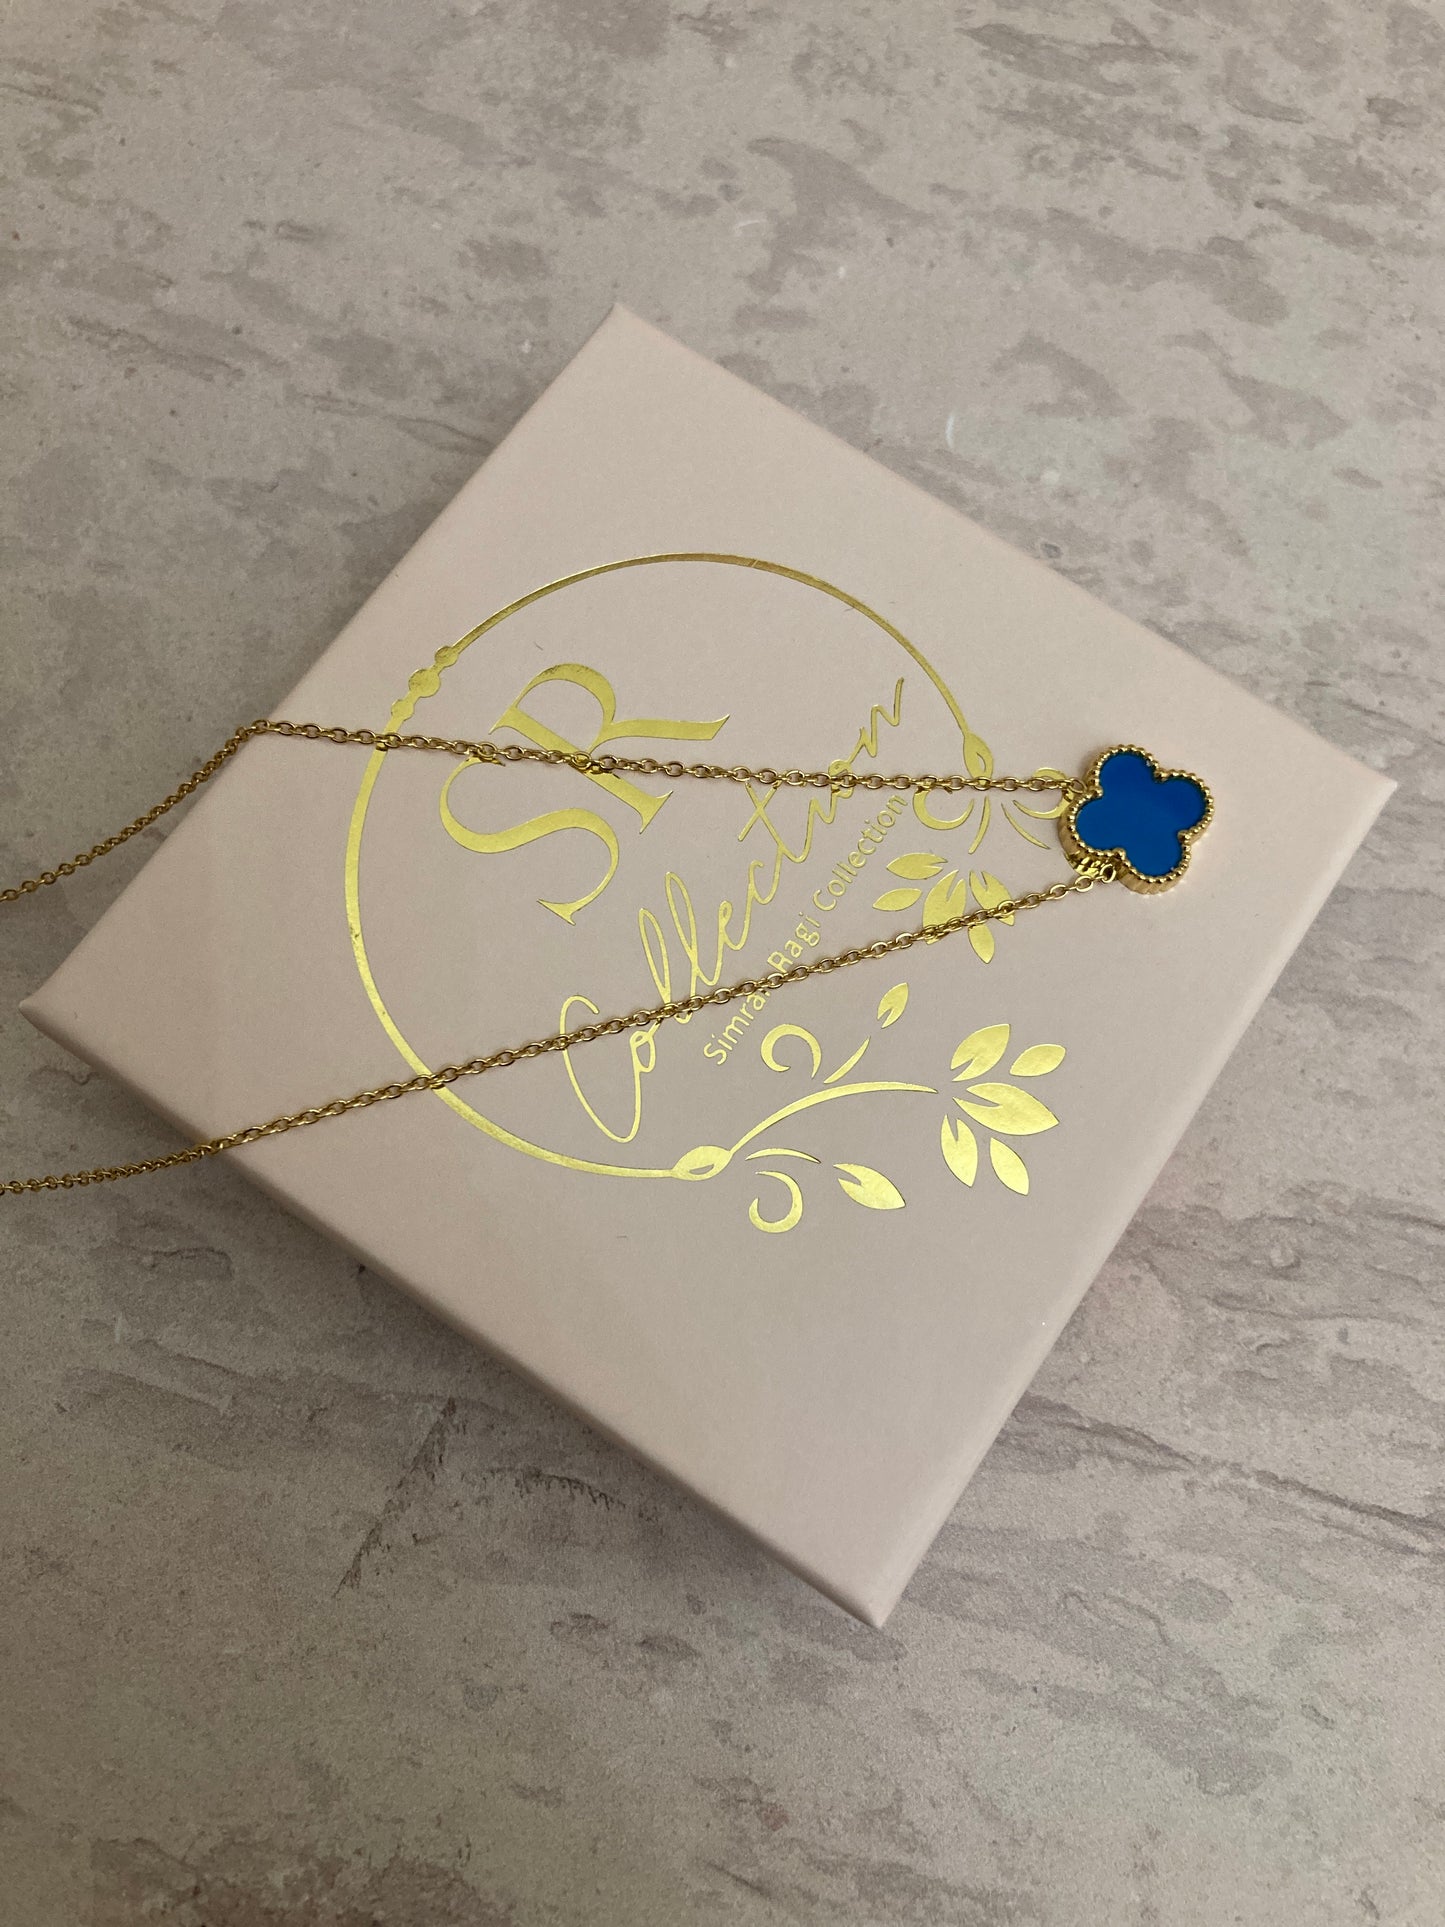 Gold Plated Blue Gold Single Clover Necklace (ST830)